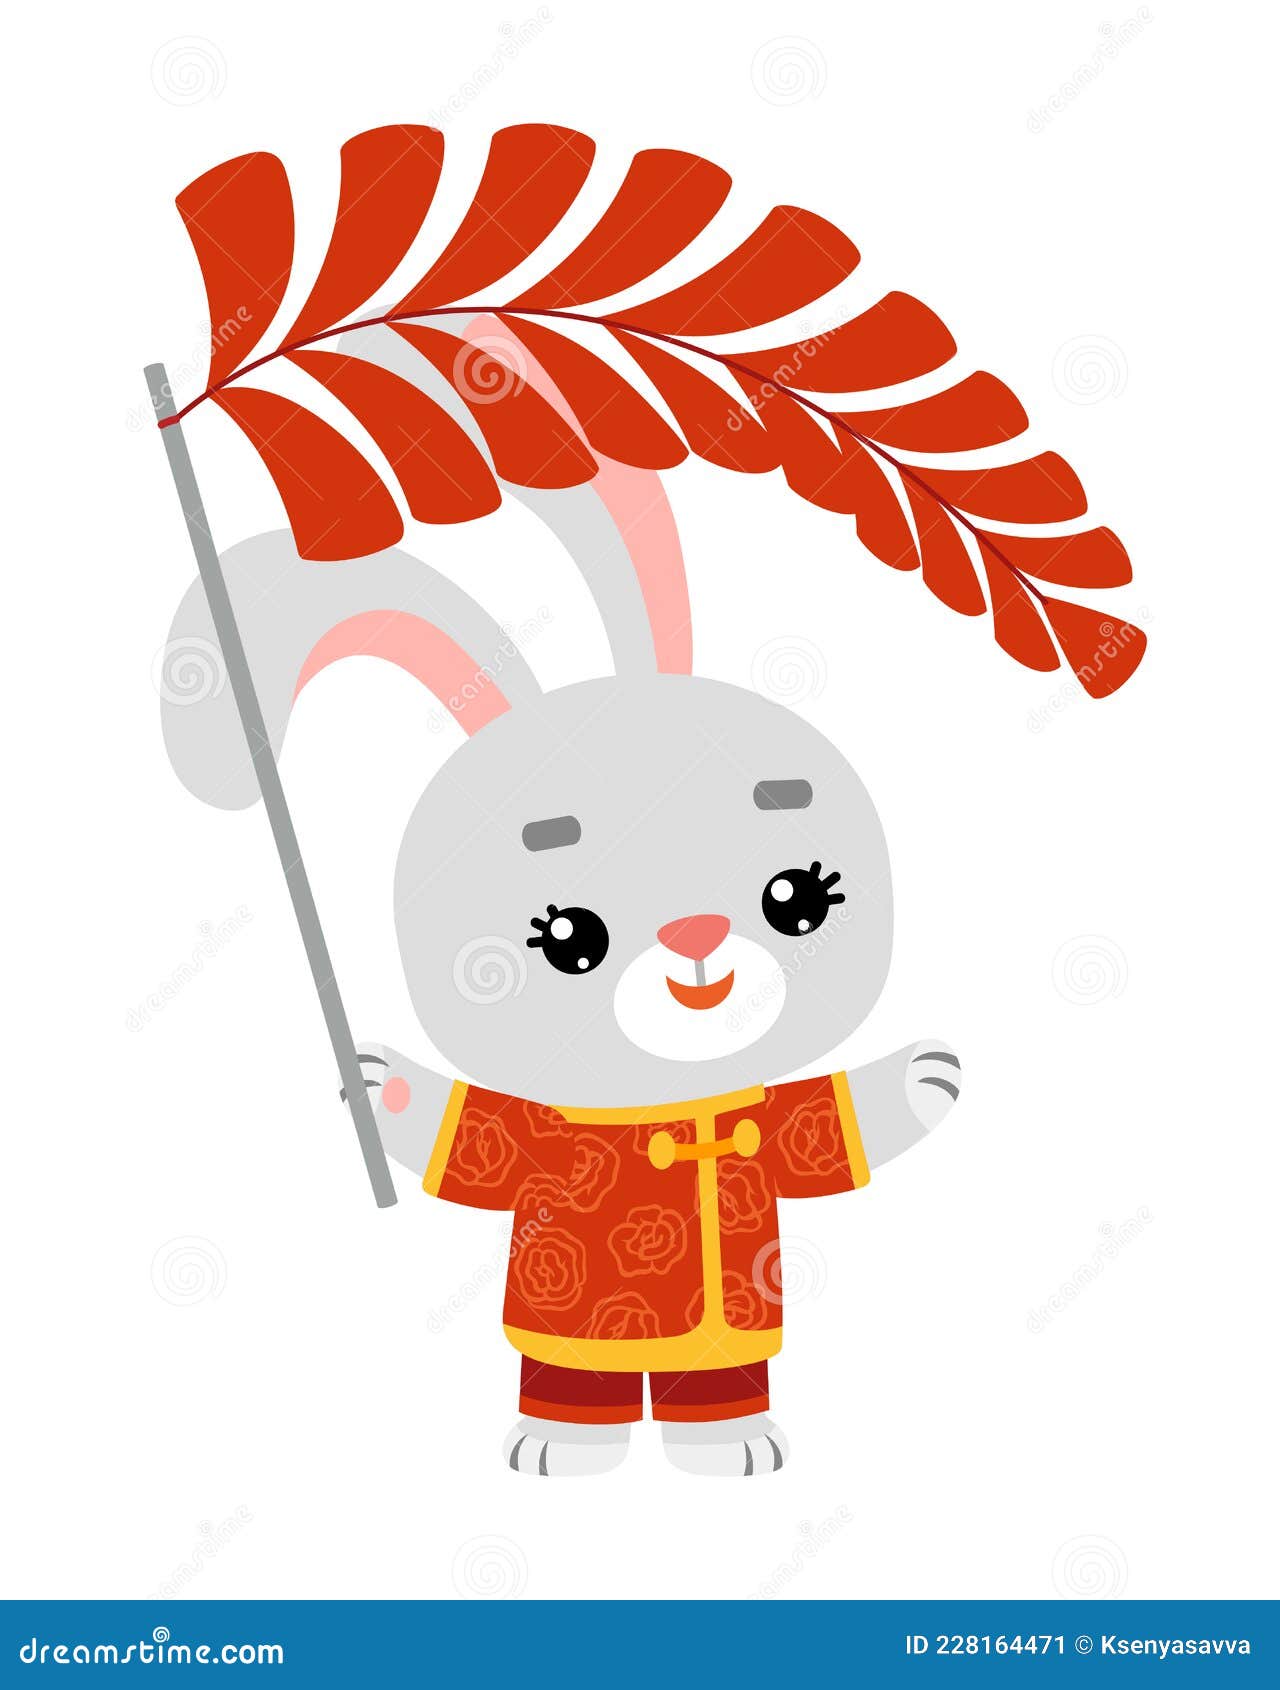 Cartoon Vector Illustration for Kids. Rabbit and Chinese New Year Decoration  Stock Vector - Illustration of cartoon, garland: 228164471